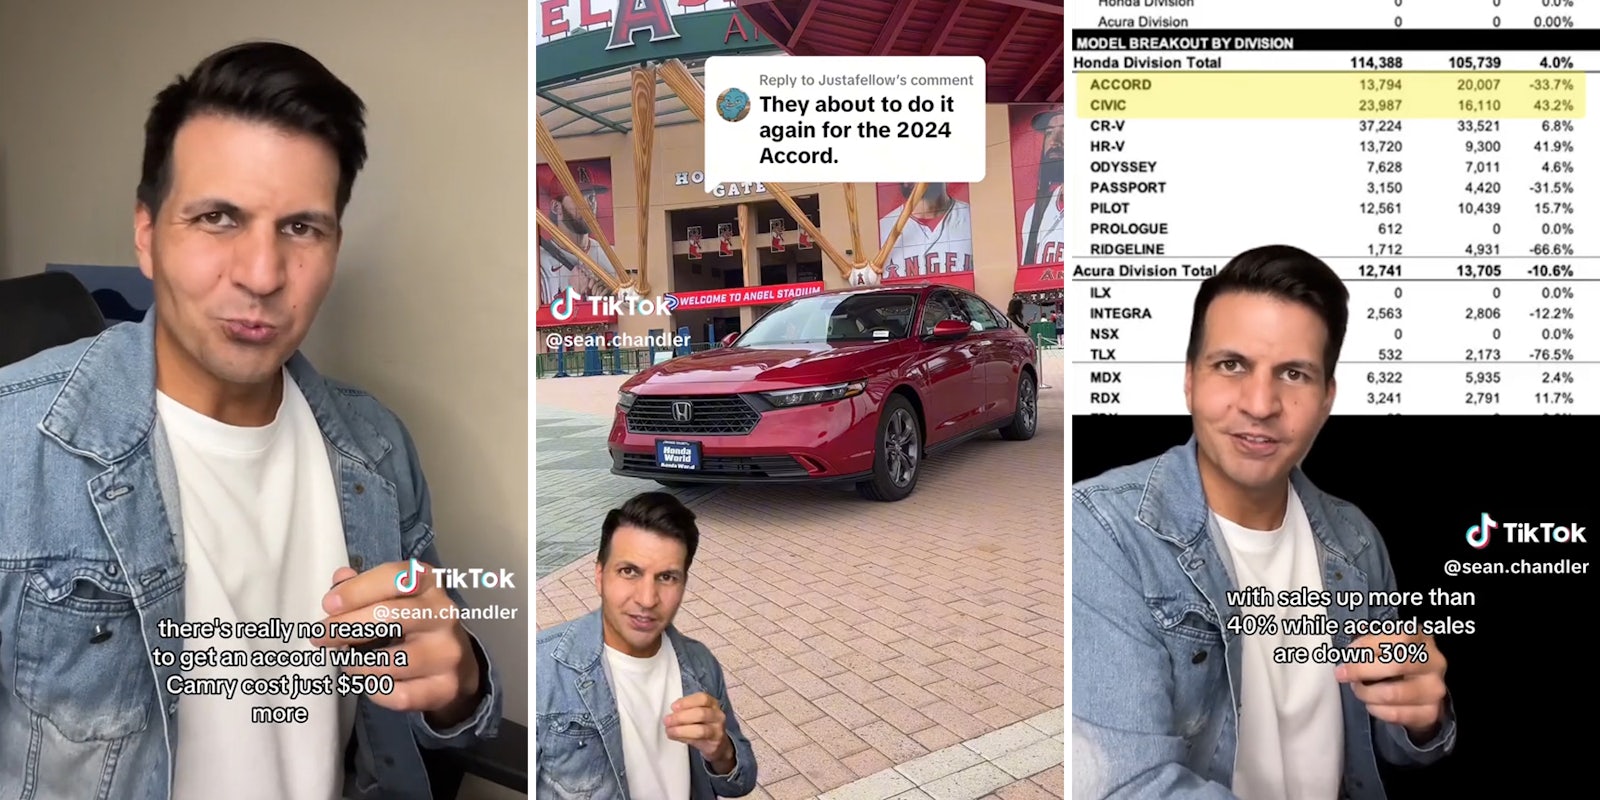 man with caption 'there's really no reason to get an accord when a camry cost just $500 more' (l) honda accord with caption 'they about to do it again for the 2024 accord' (c) man with sales figure chart in background, caption 'with sales up more than 40% while accord sales are down 30%' (r)